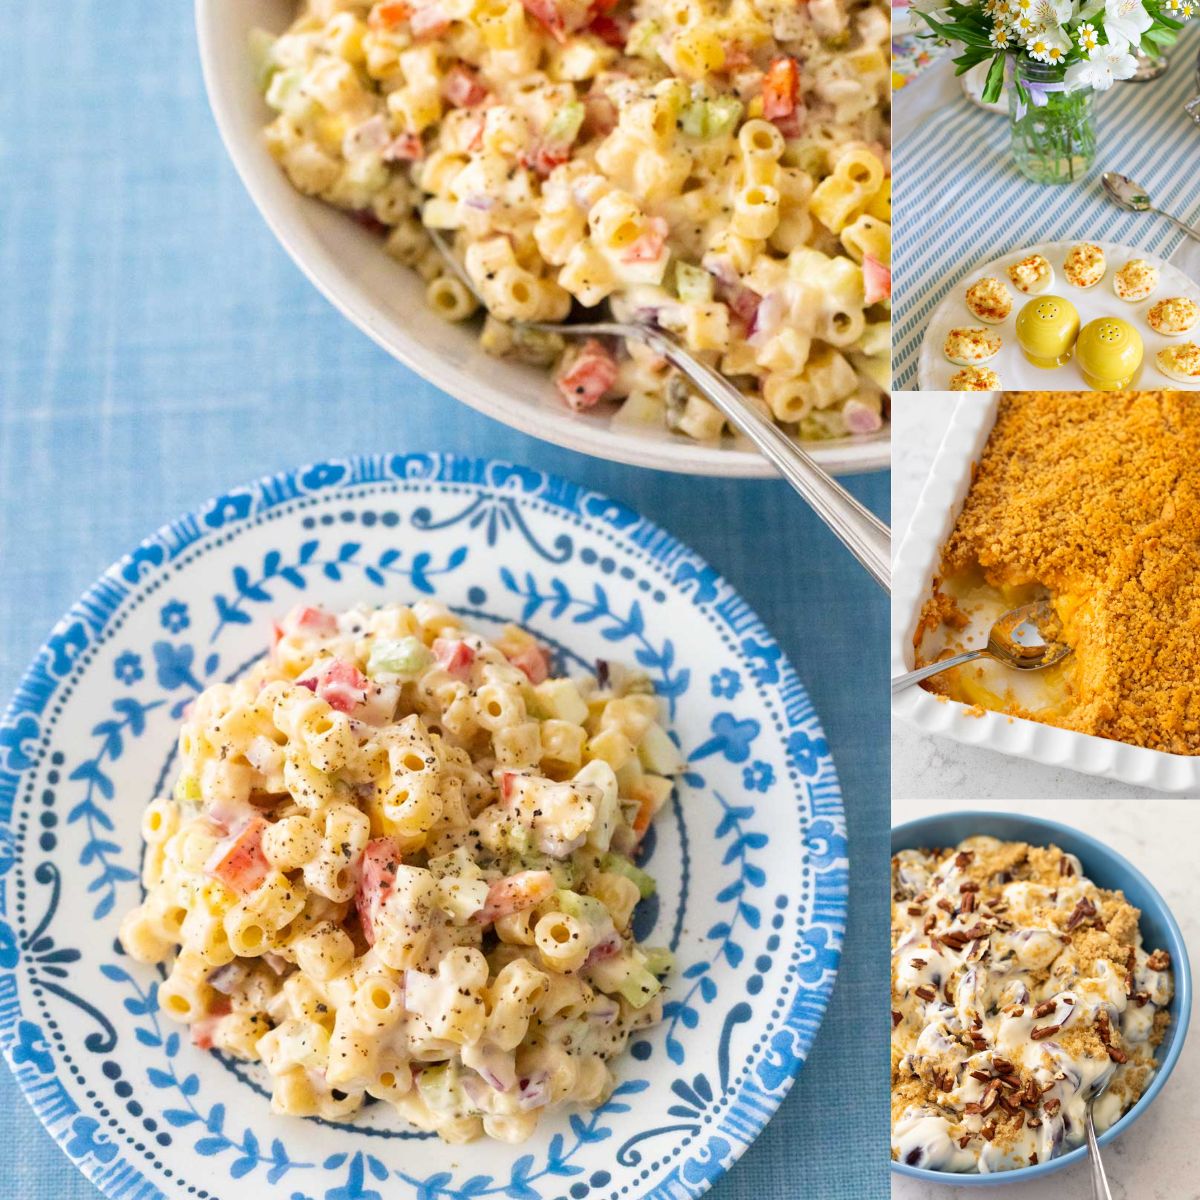 The photo collage shows several classic Southern Easter side dishes including macaroni, pineapple cheese casserole, grape salad, and deviled eggs.